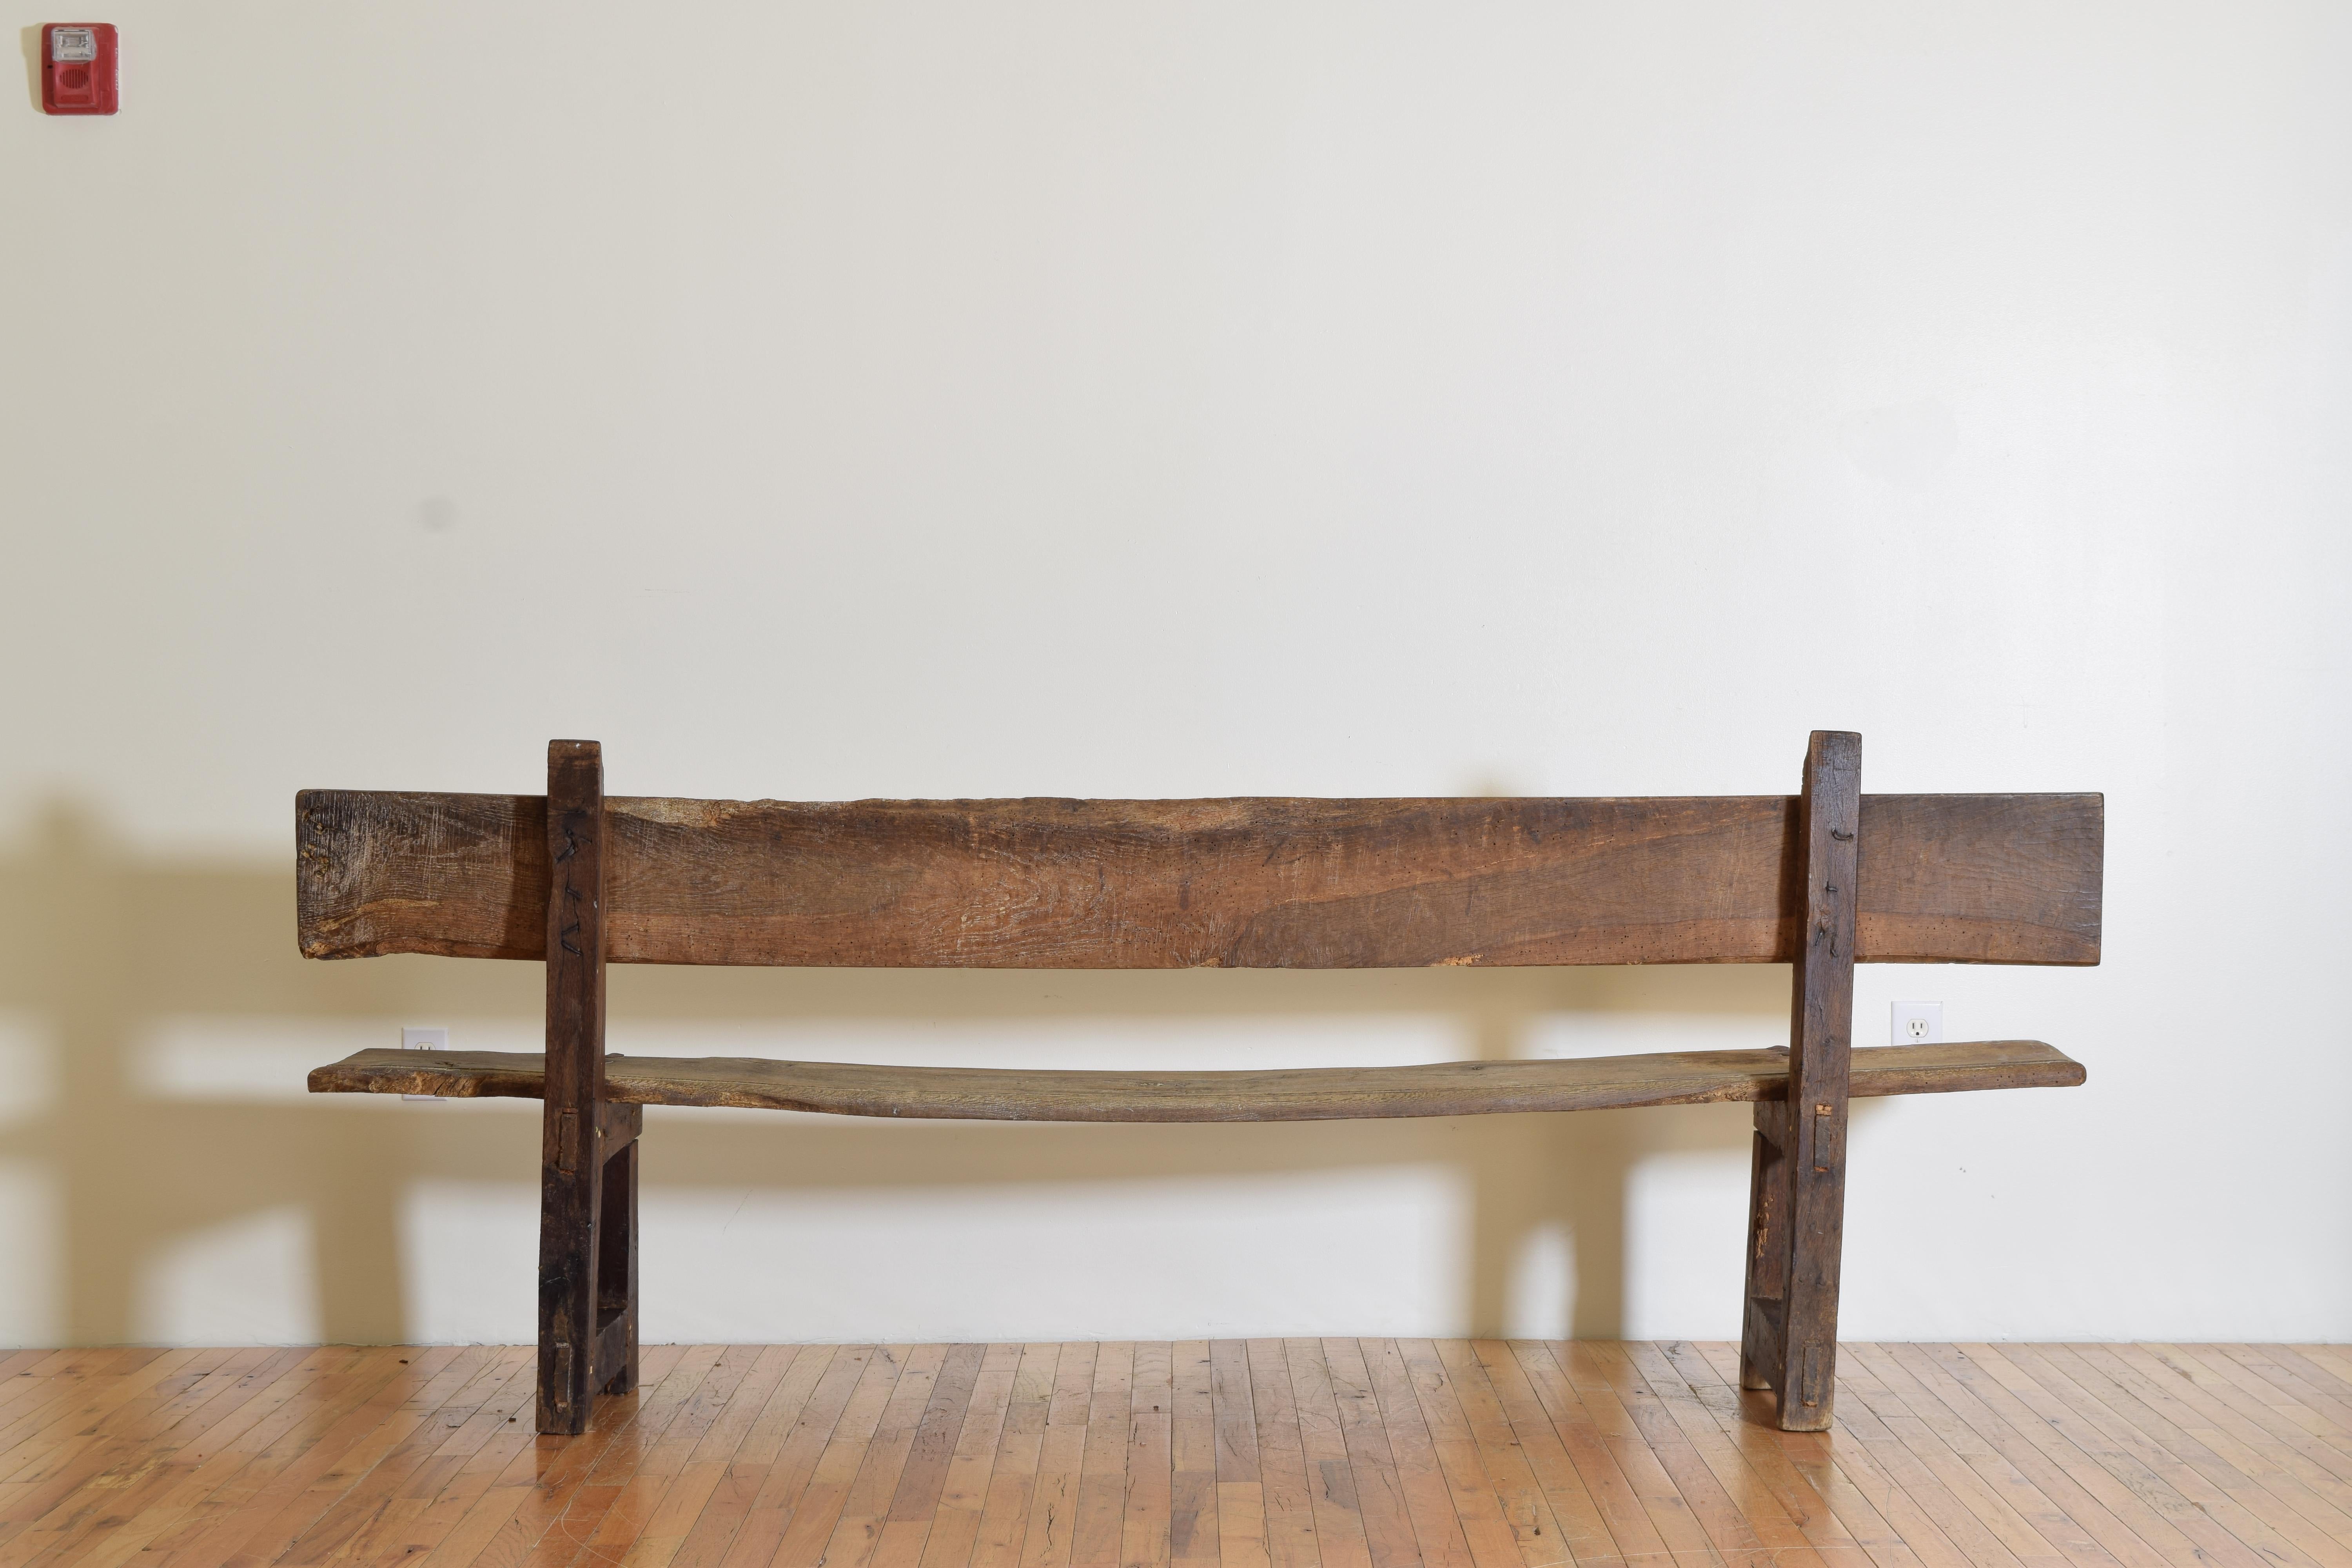 Oak Spanish Baroque Style Bench in Light Roble Wood, circa 1800